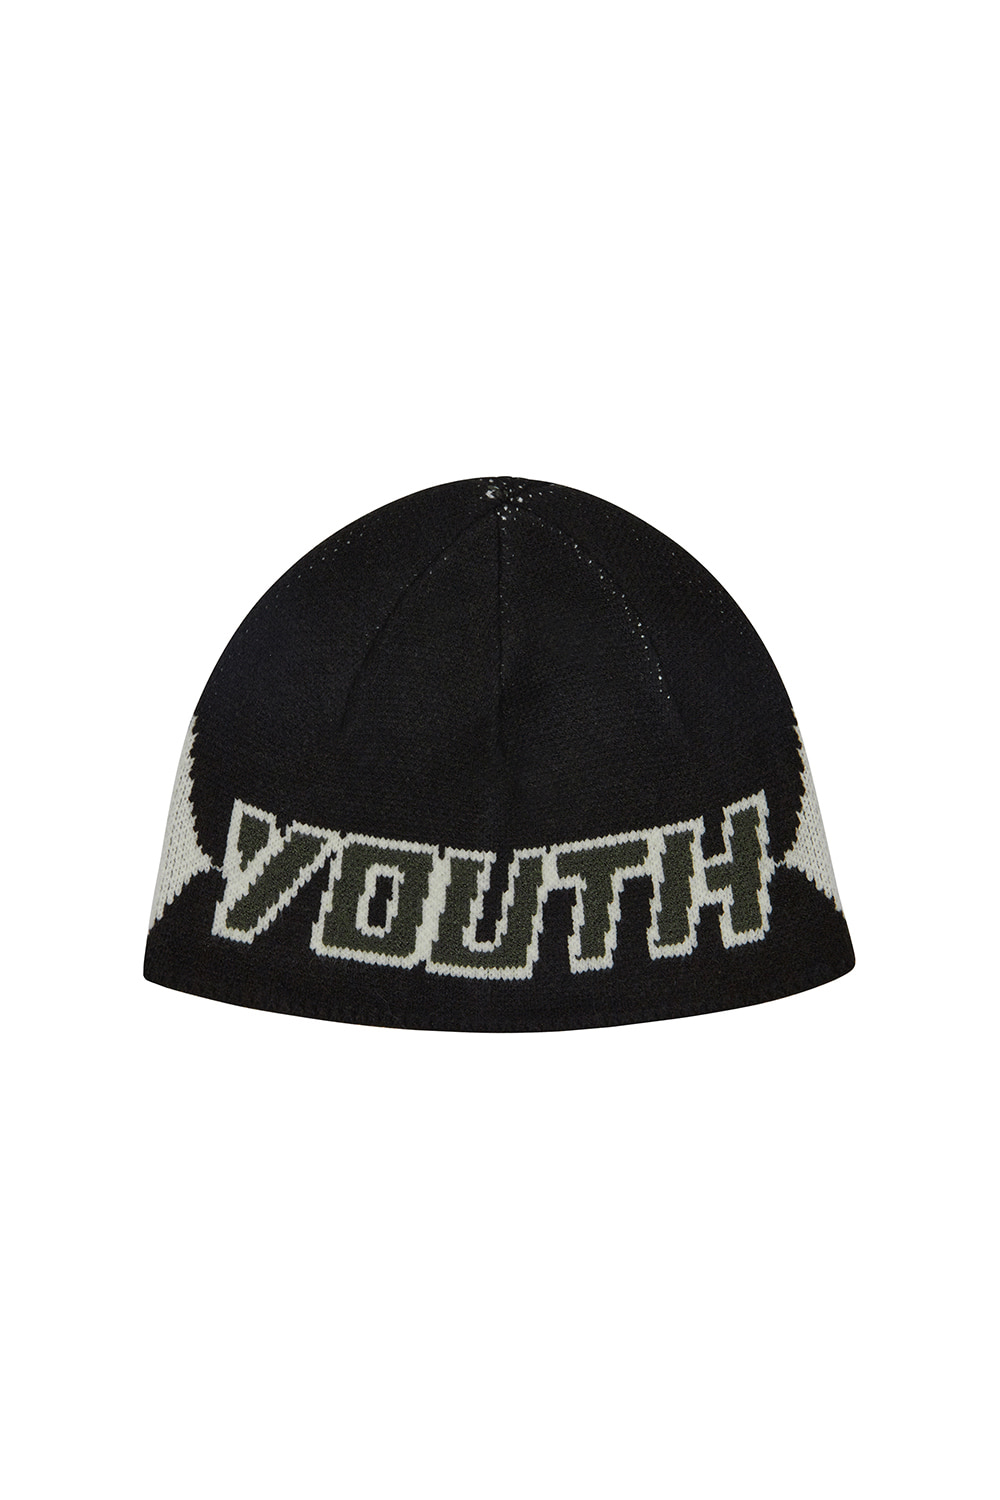 YOUTH IS YOURS